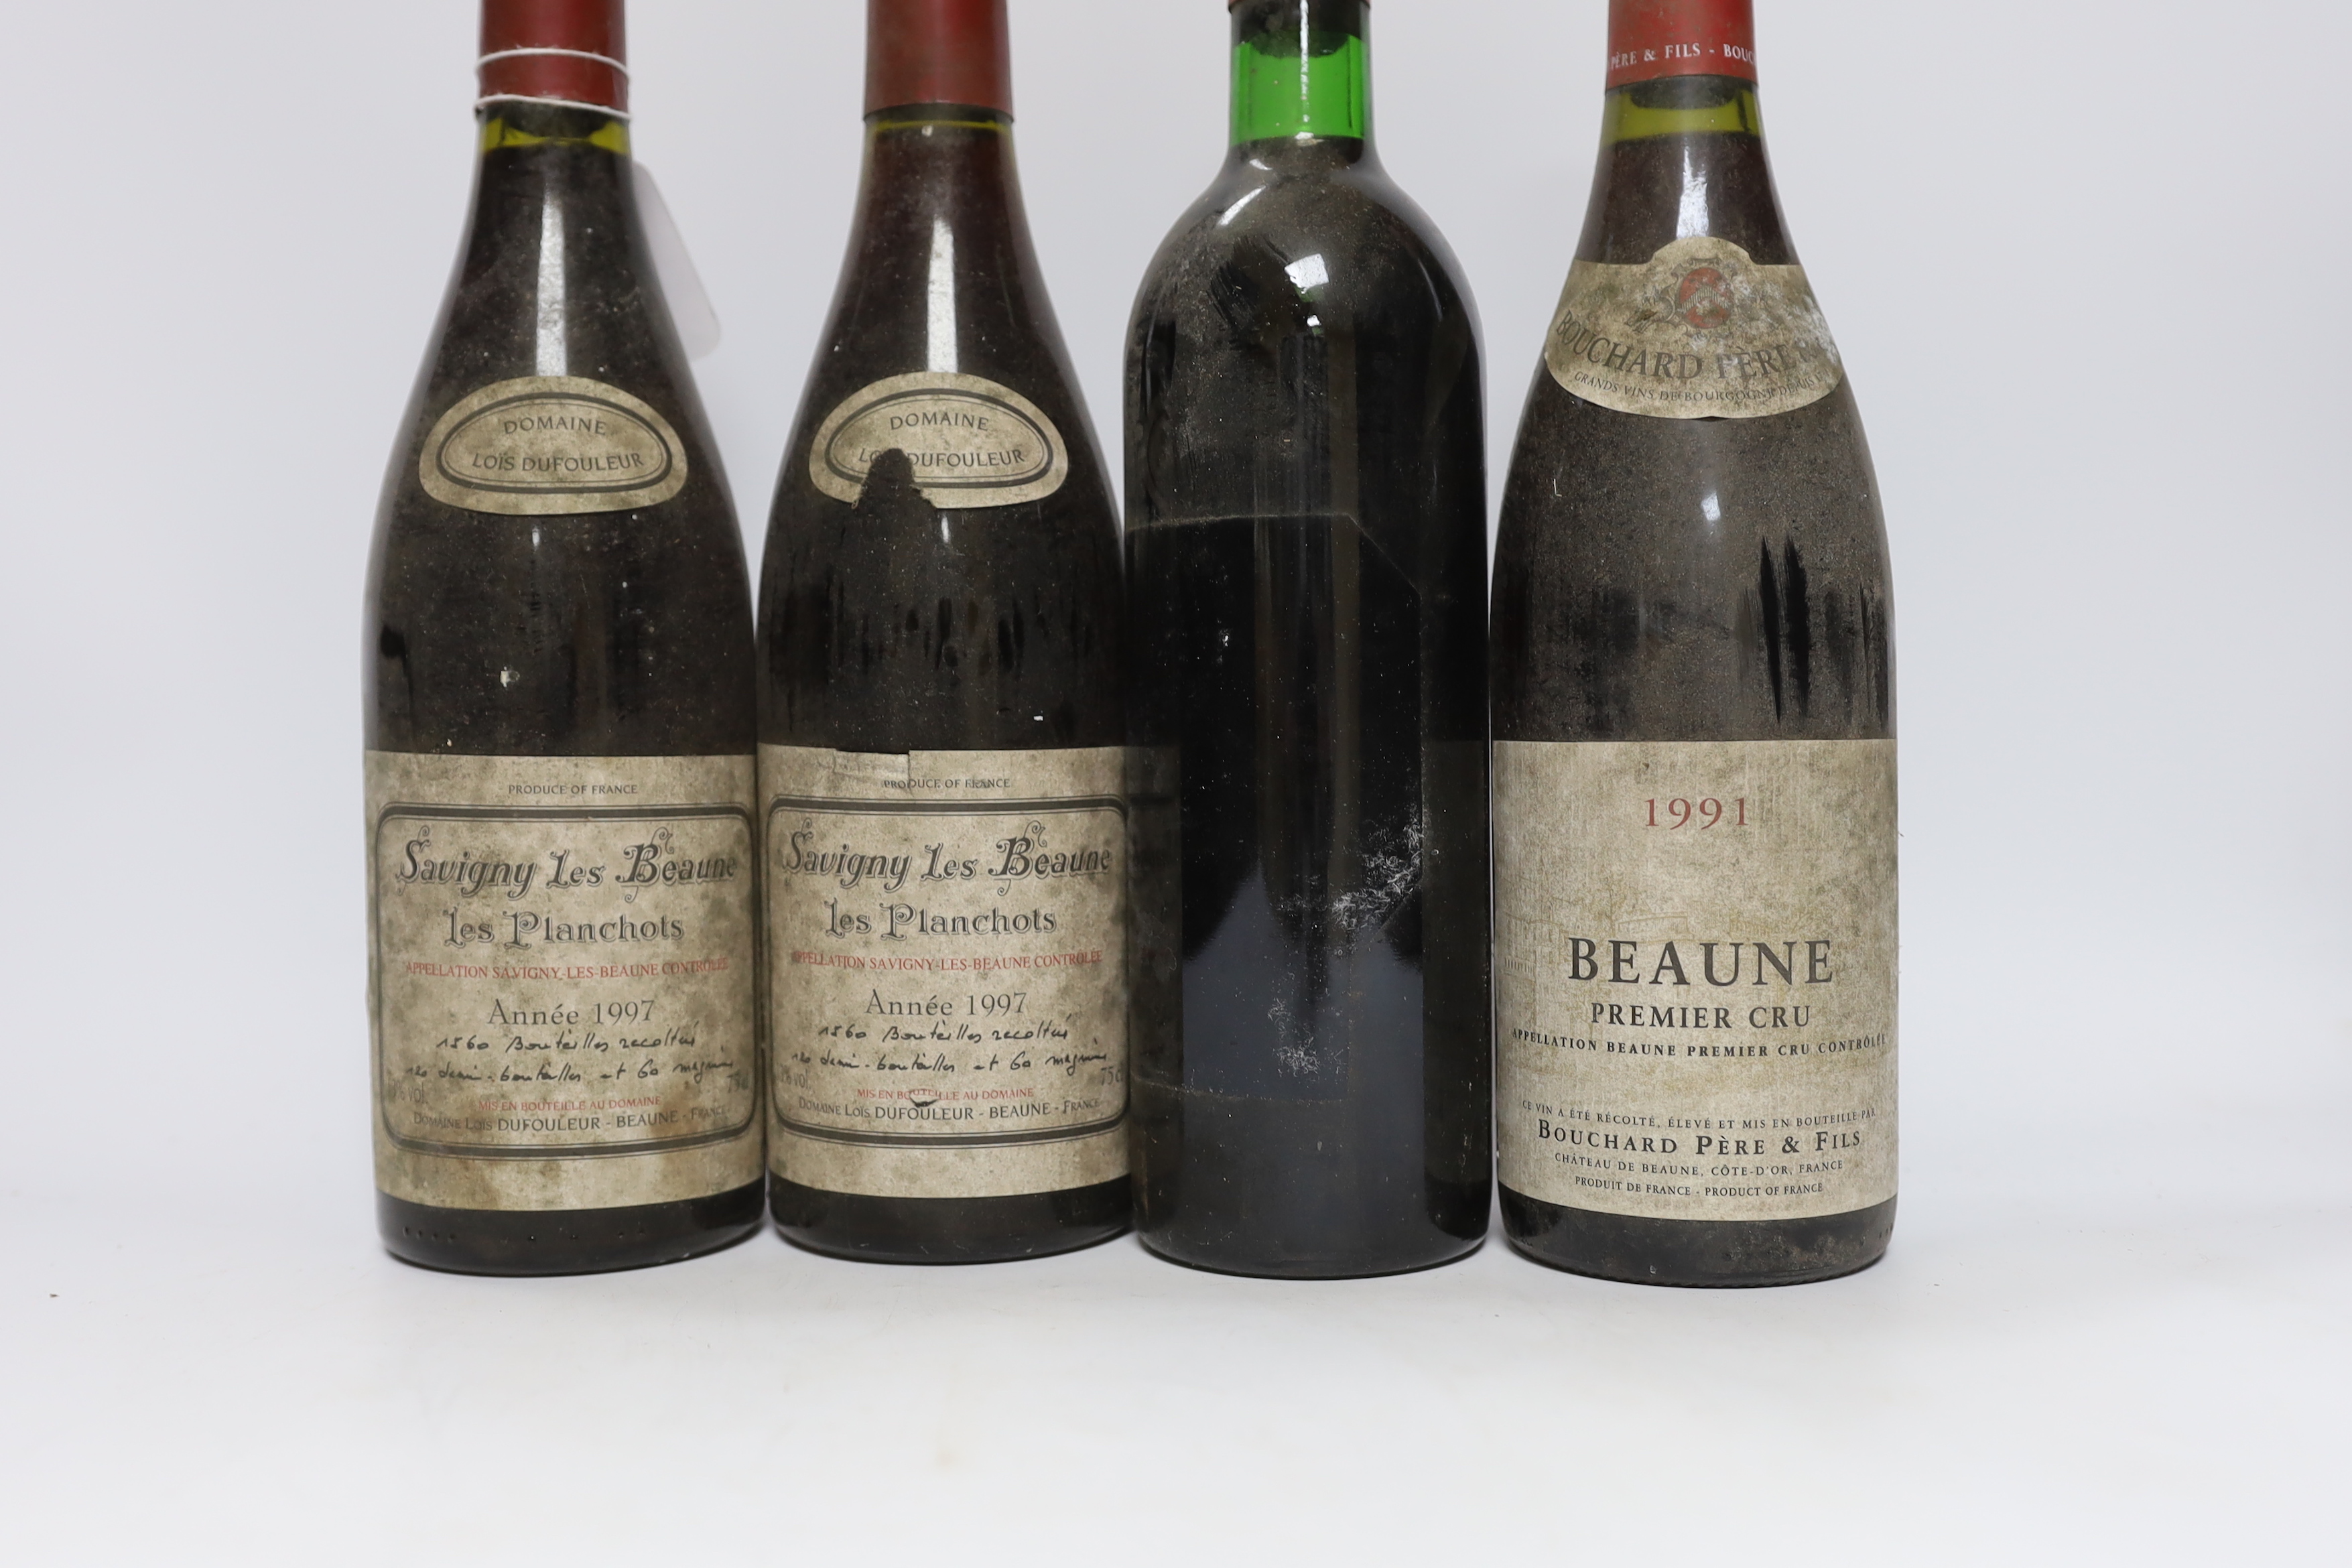 Six bottles of red wine including two bottles of Savigny Les Beaune 1997